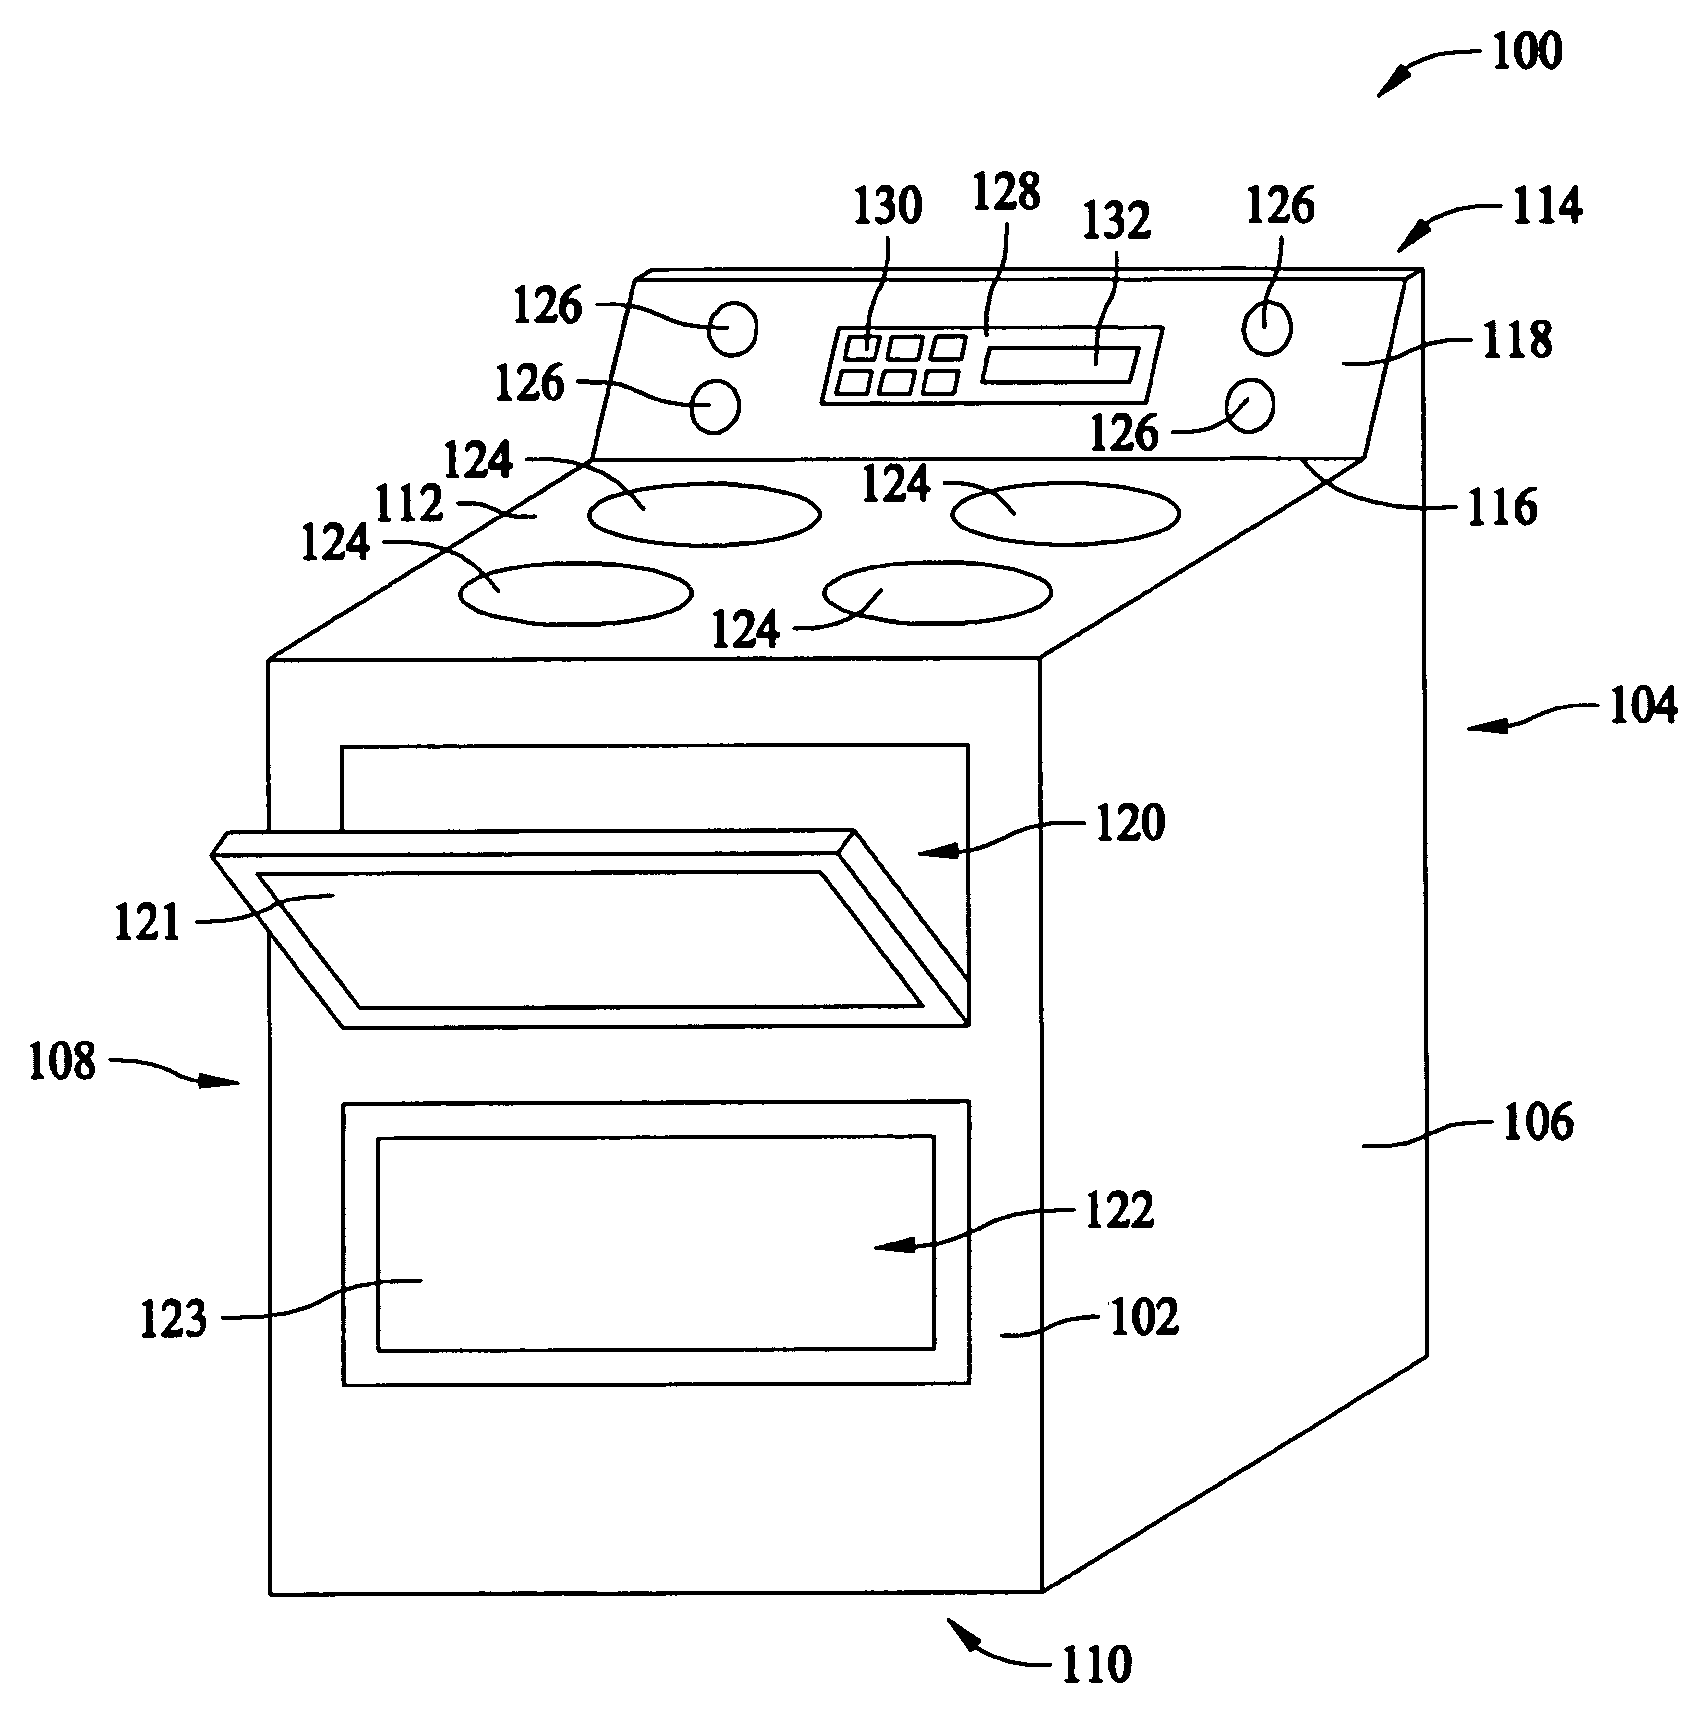 Apparatus and methods for operating an electric appliance